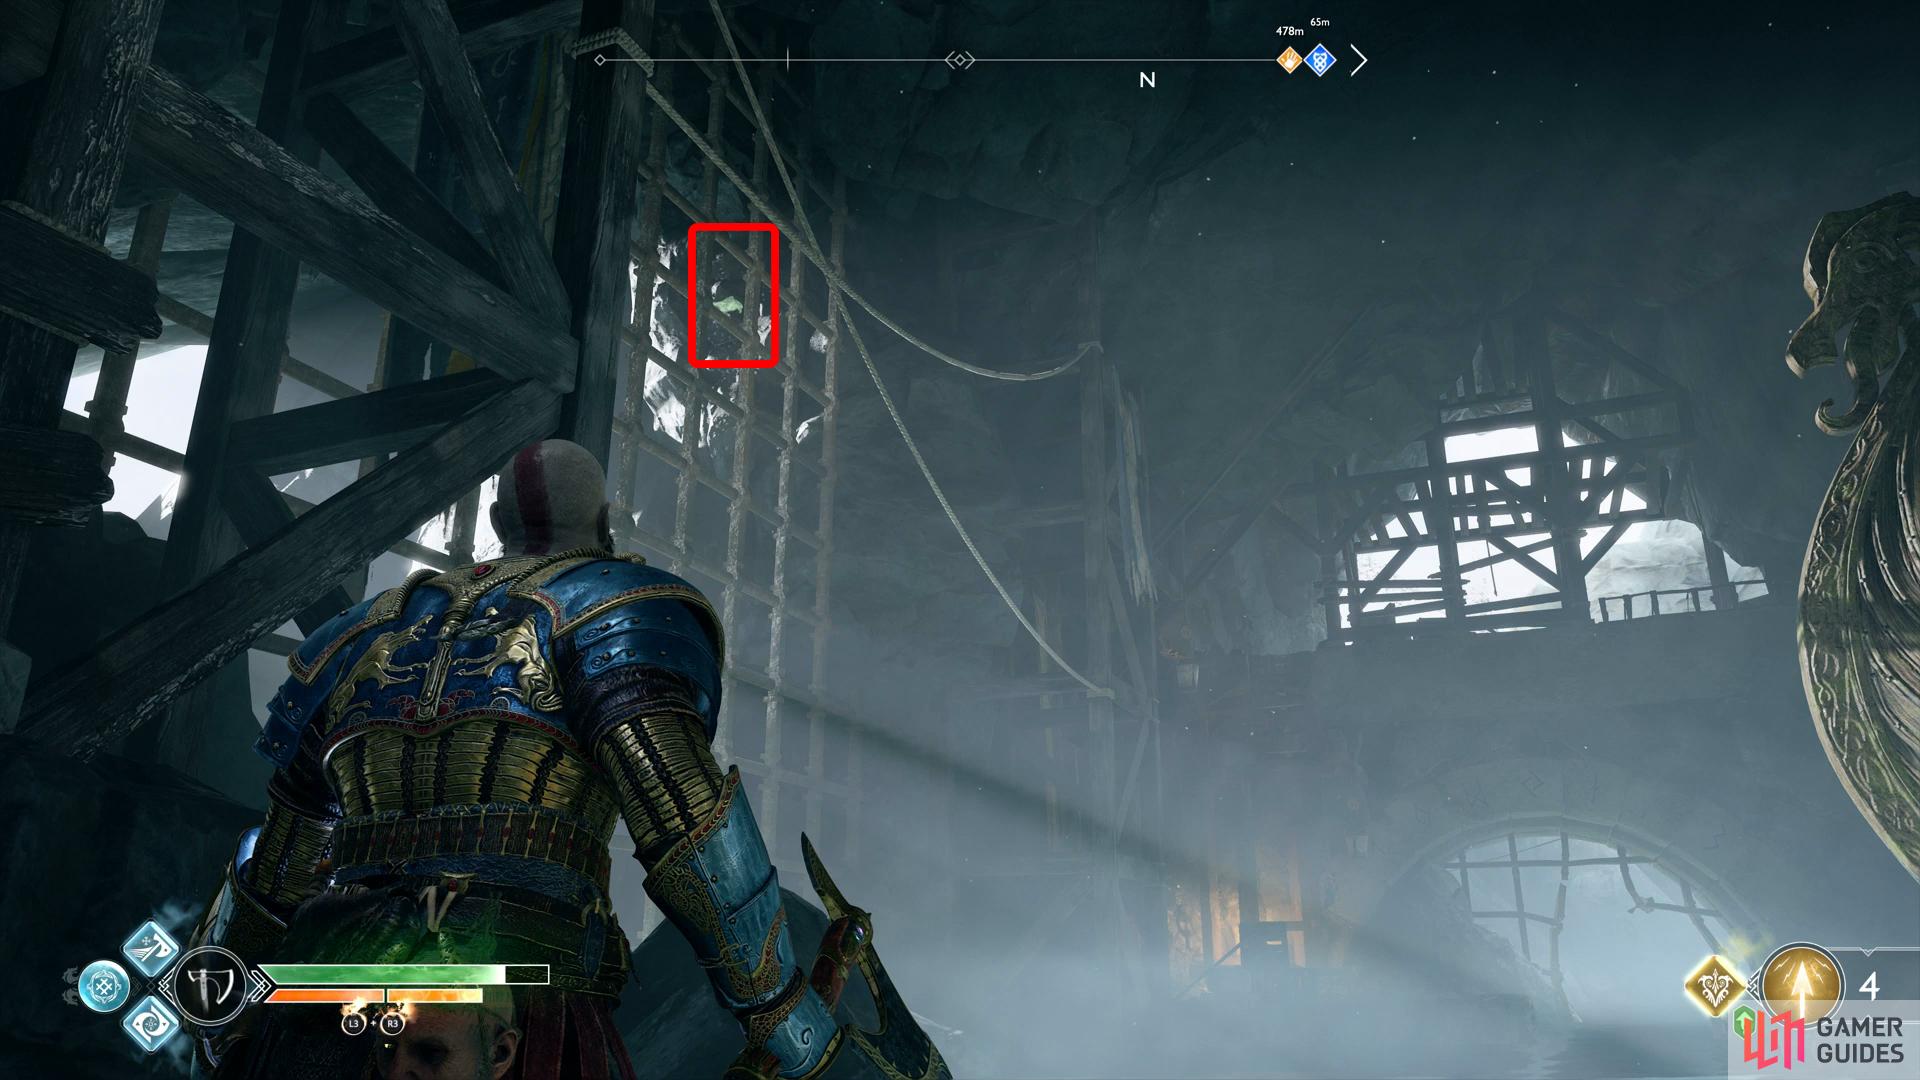 Search the gate opposite the Reaver Ship to find the last Raven here.